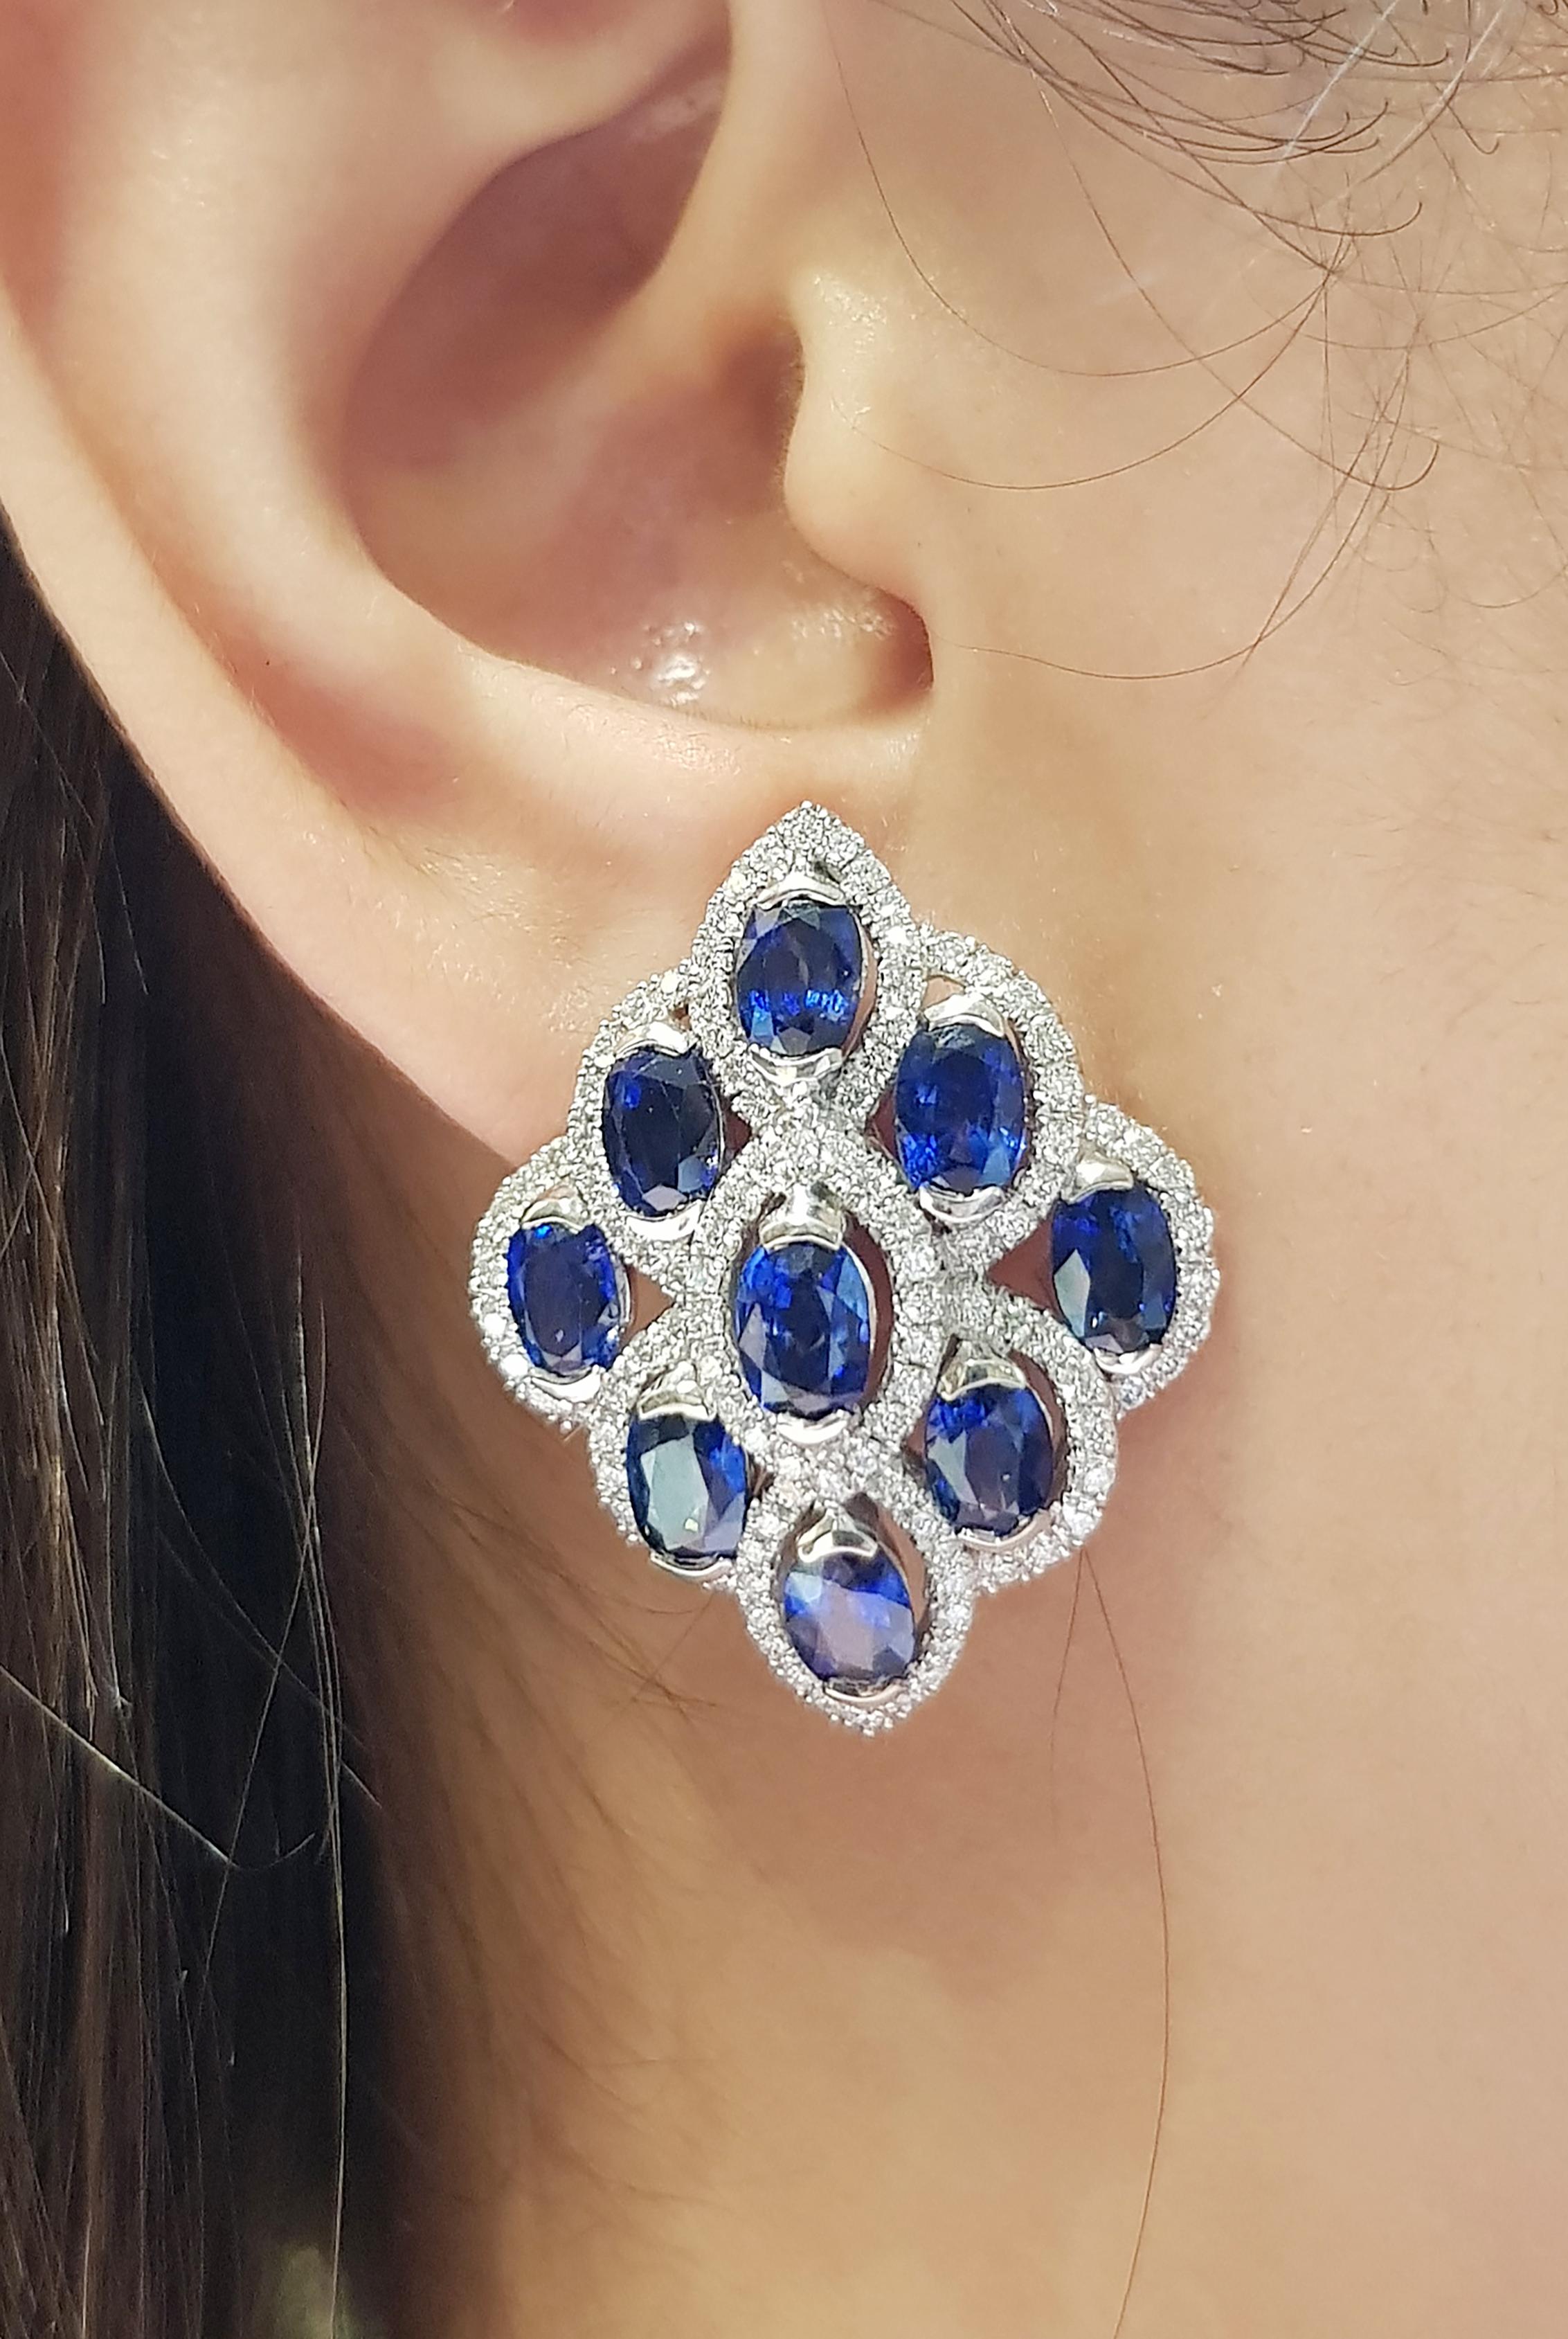 Blue Sapphire 11.33 carats with Diamond 1.67 carats Earrings set in 18 Karat White Gold Settings

Width:  2.5 cm 
Length: 3.1 cm
Total Weight: 22.61 grams

